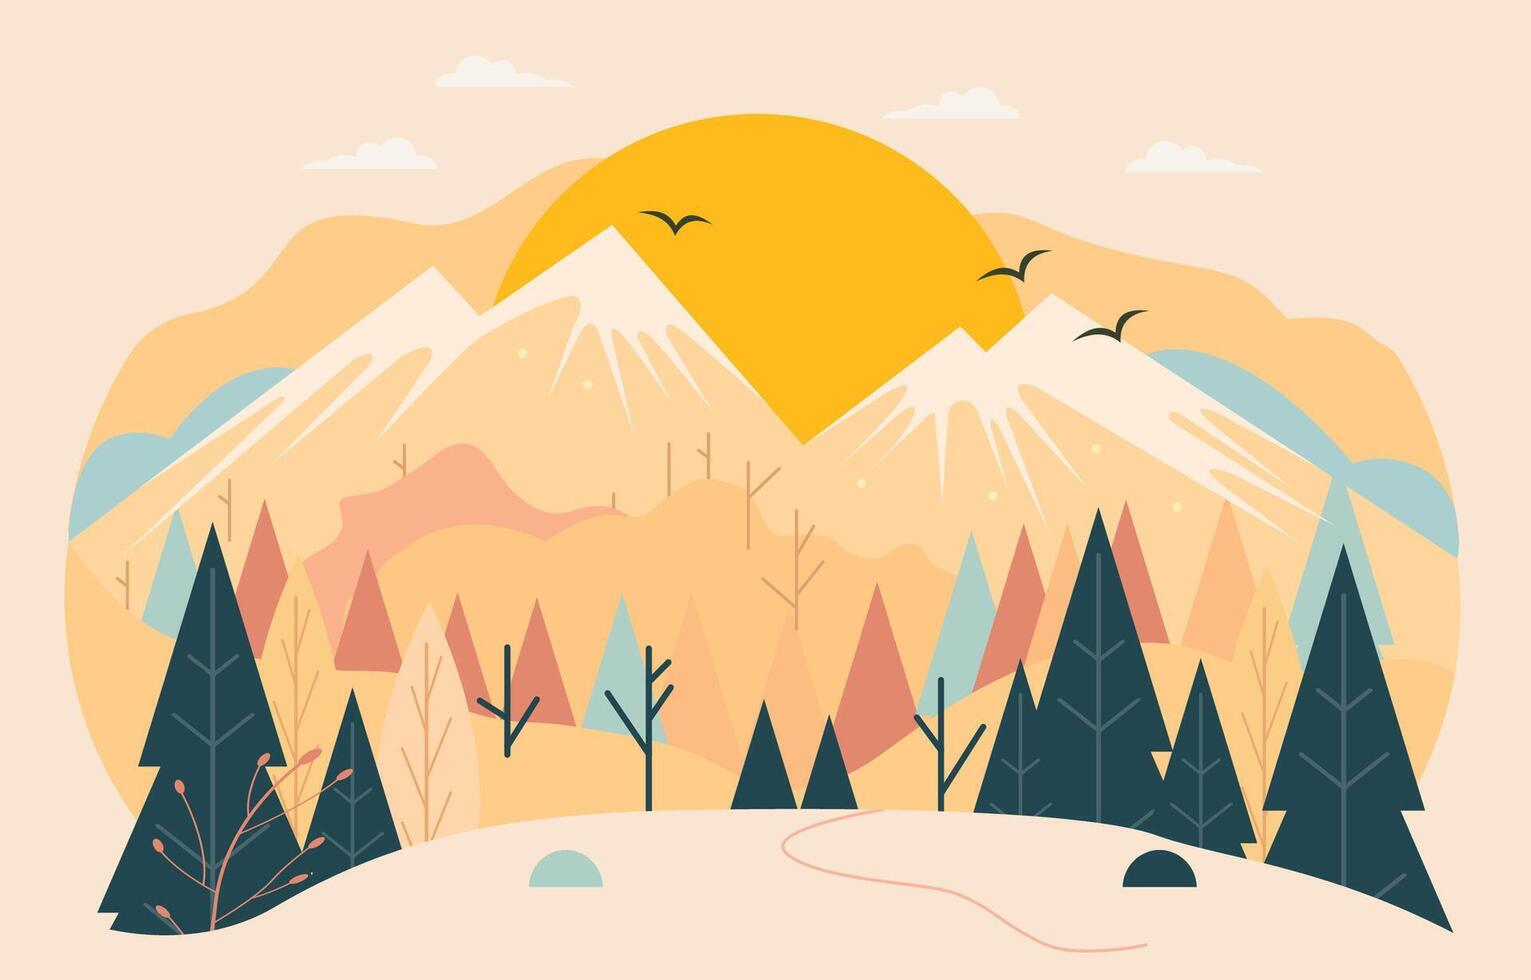 Flat Design Illustration of Mountain Nature View with Pine Trees in Summer vector